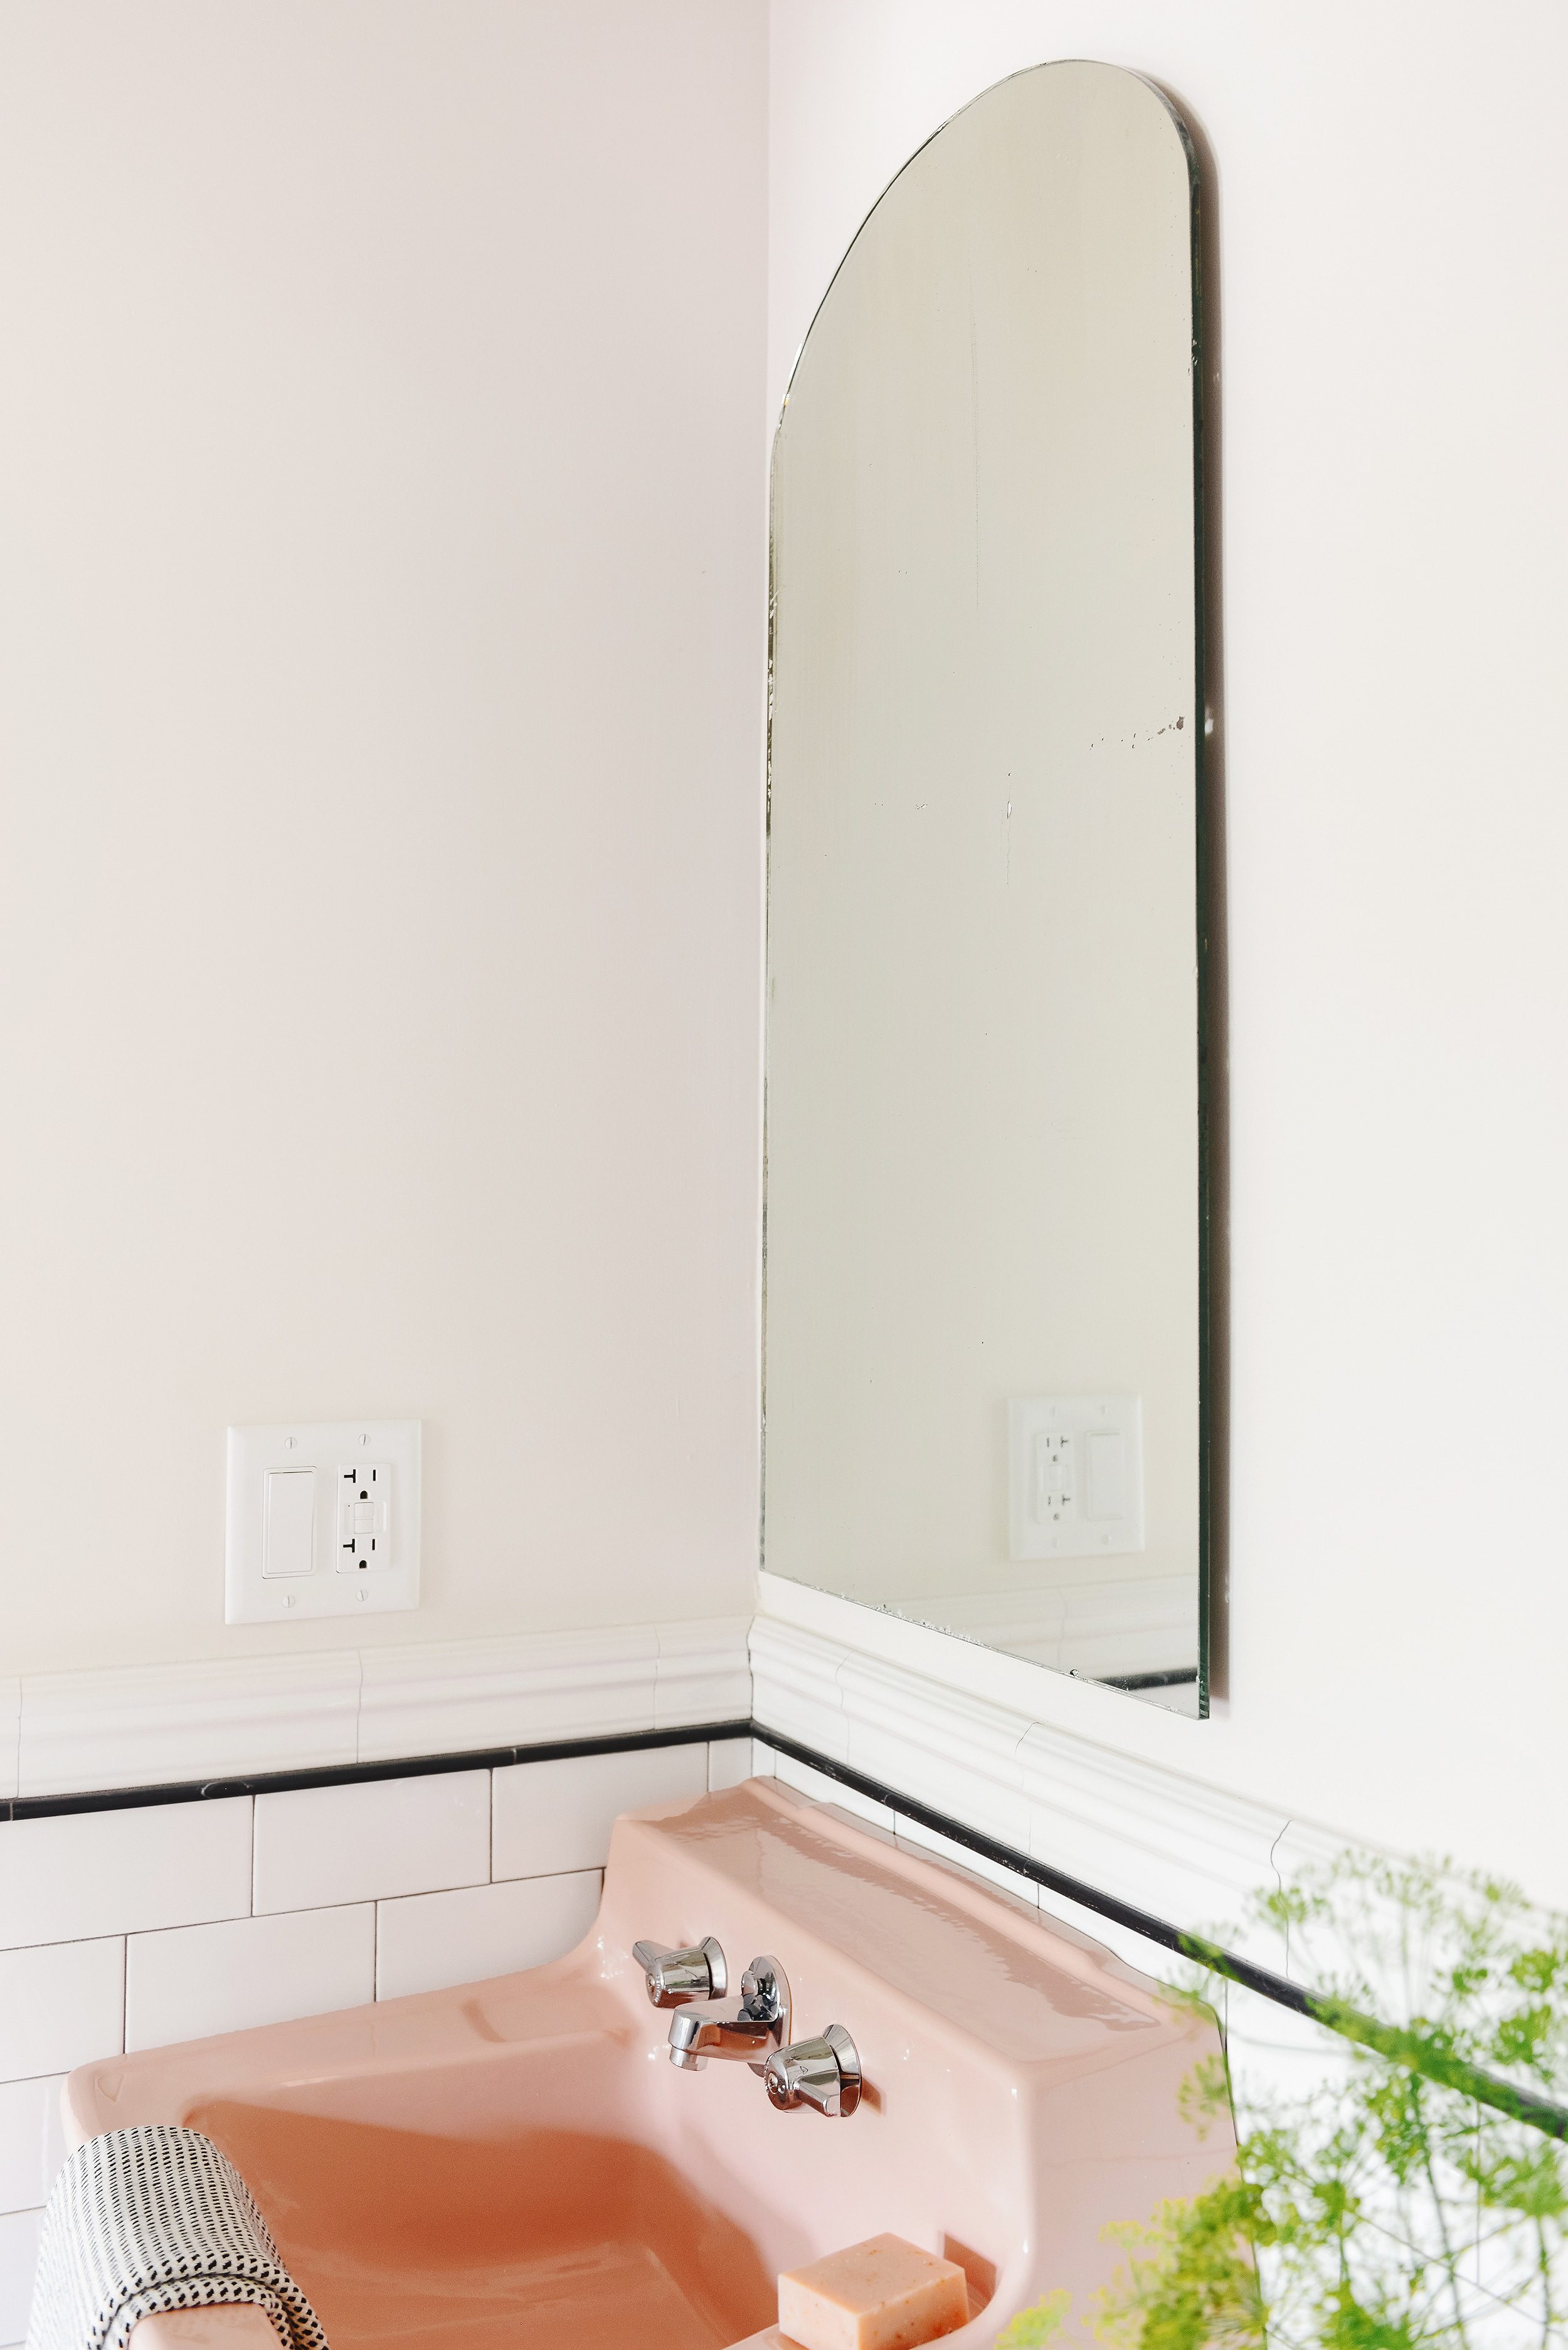 The vintage mirror floats away from the wall | via Yellow Brick Home